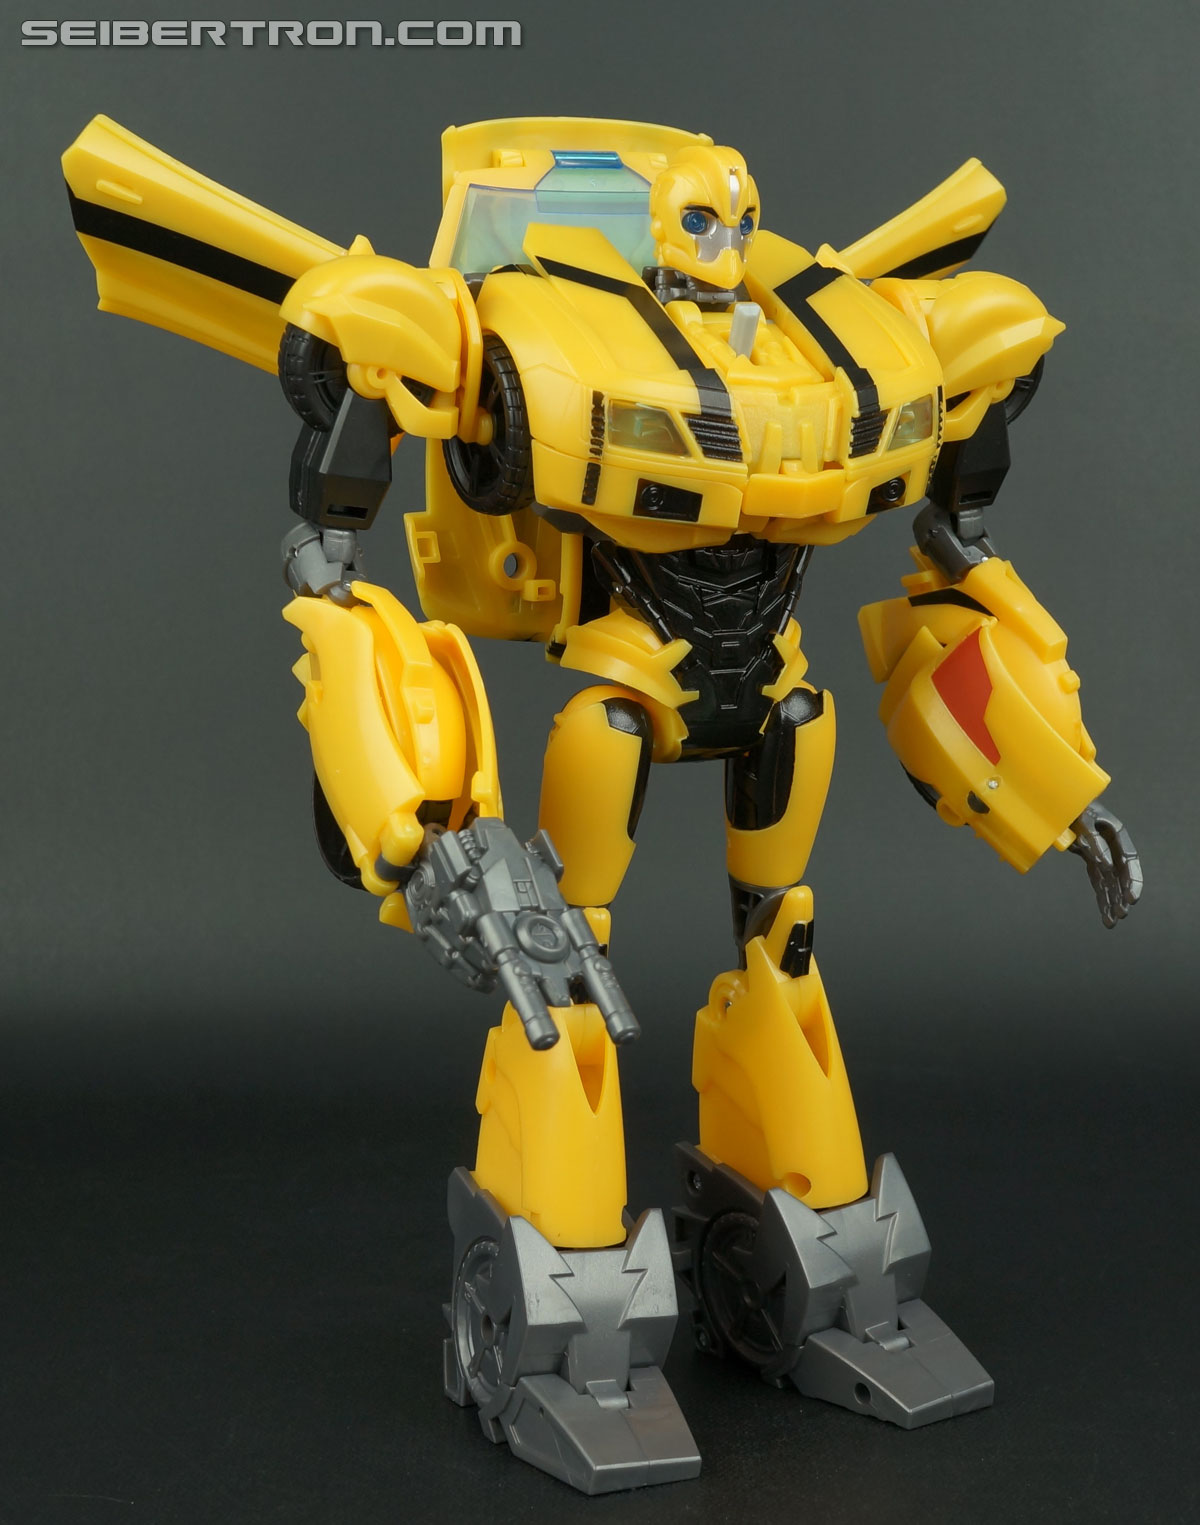 Transformers Prime: Robots In Disguise Bumblebee (Image #62 of 114)